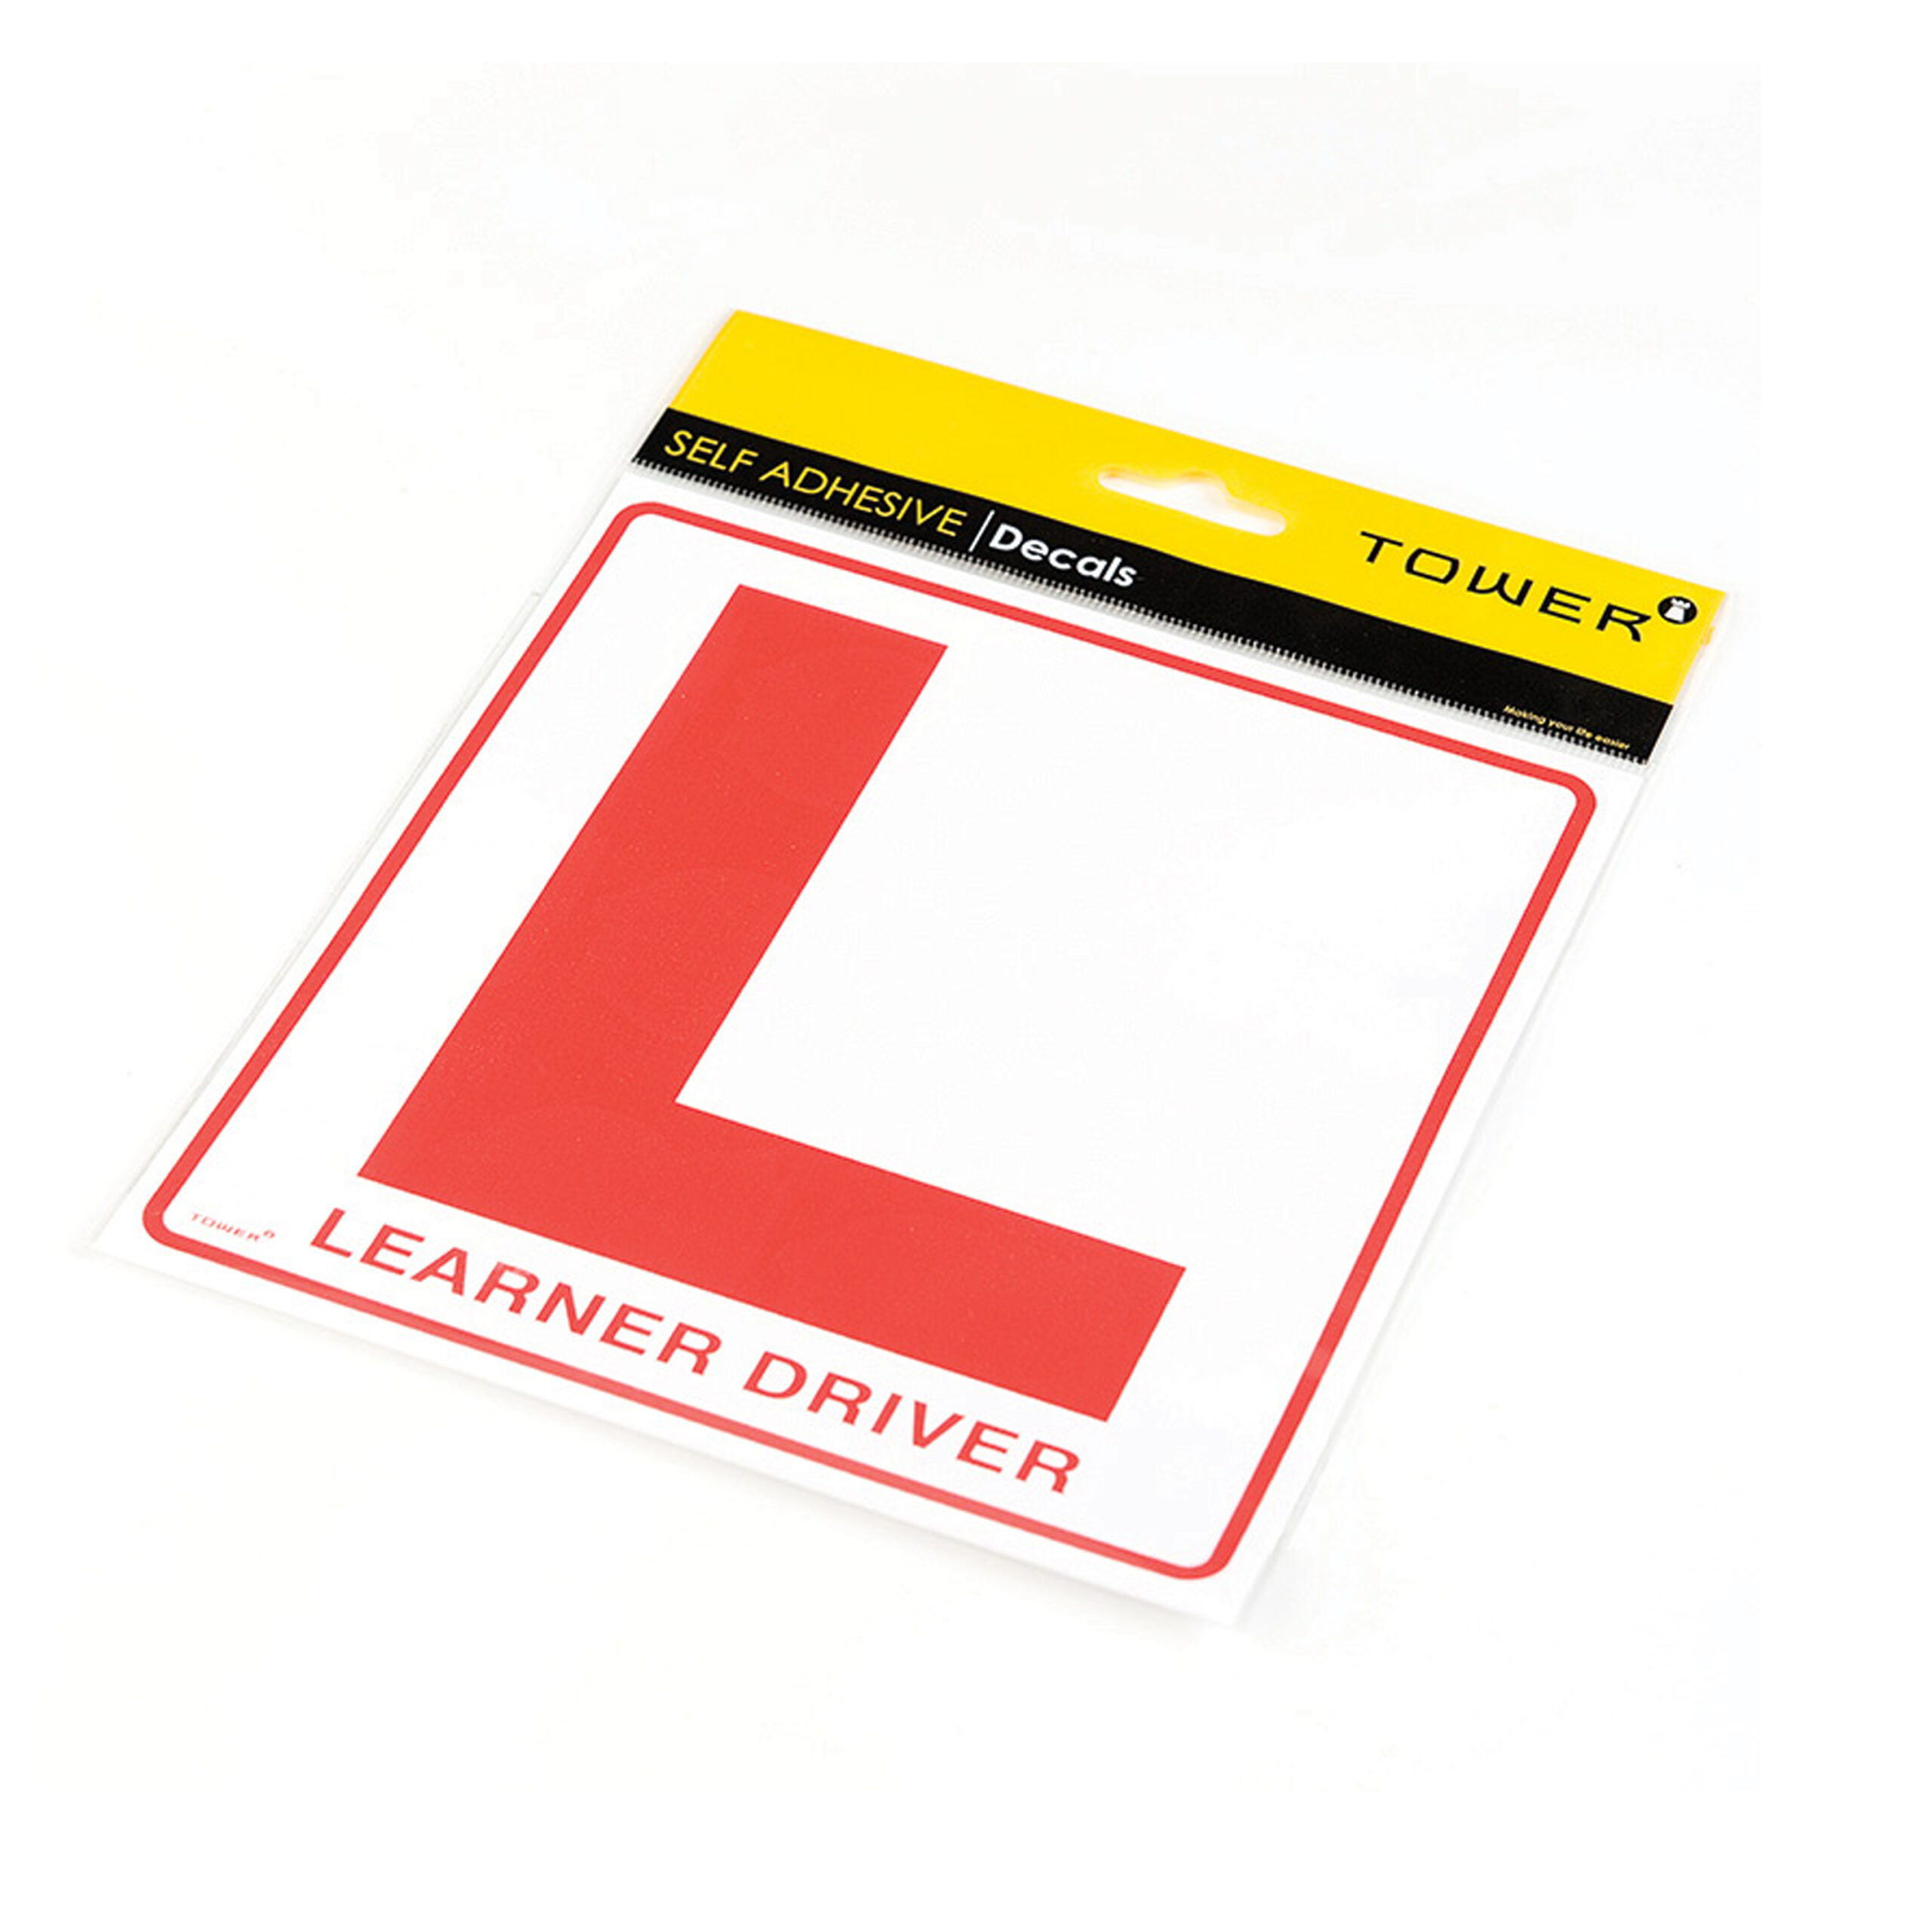 TOWER  SELF
ADHESIVE
"LEARNER DECAL"
LABEL  162x172mm